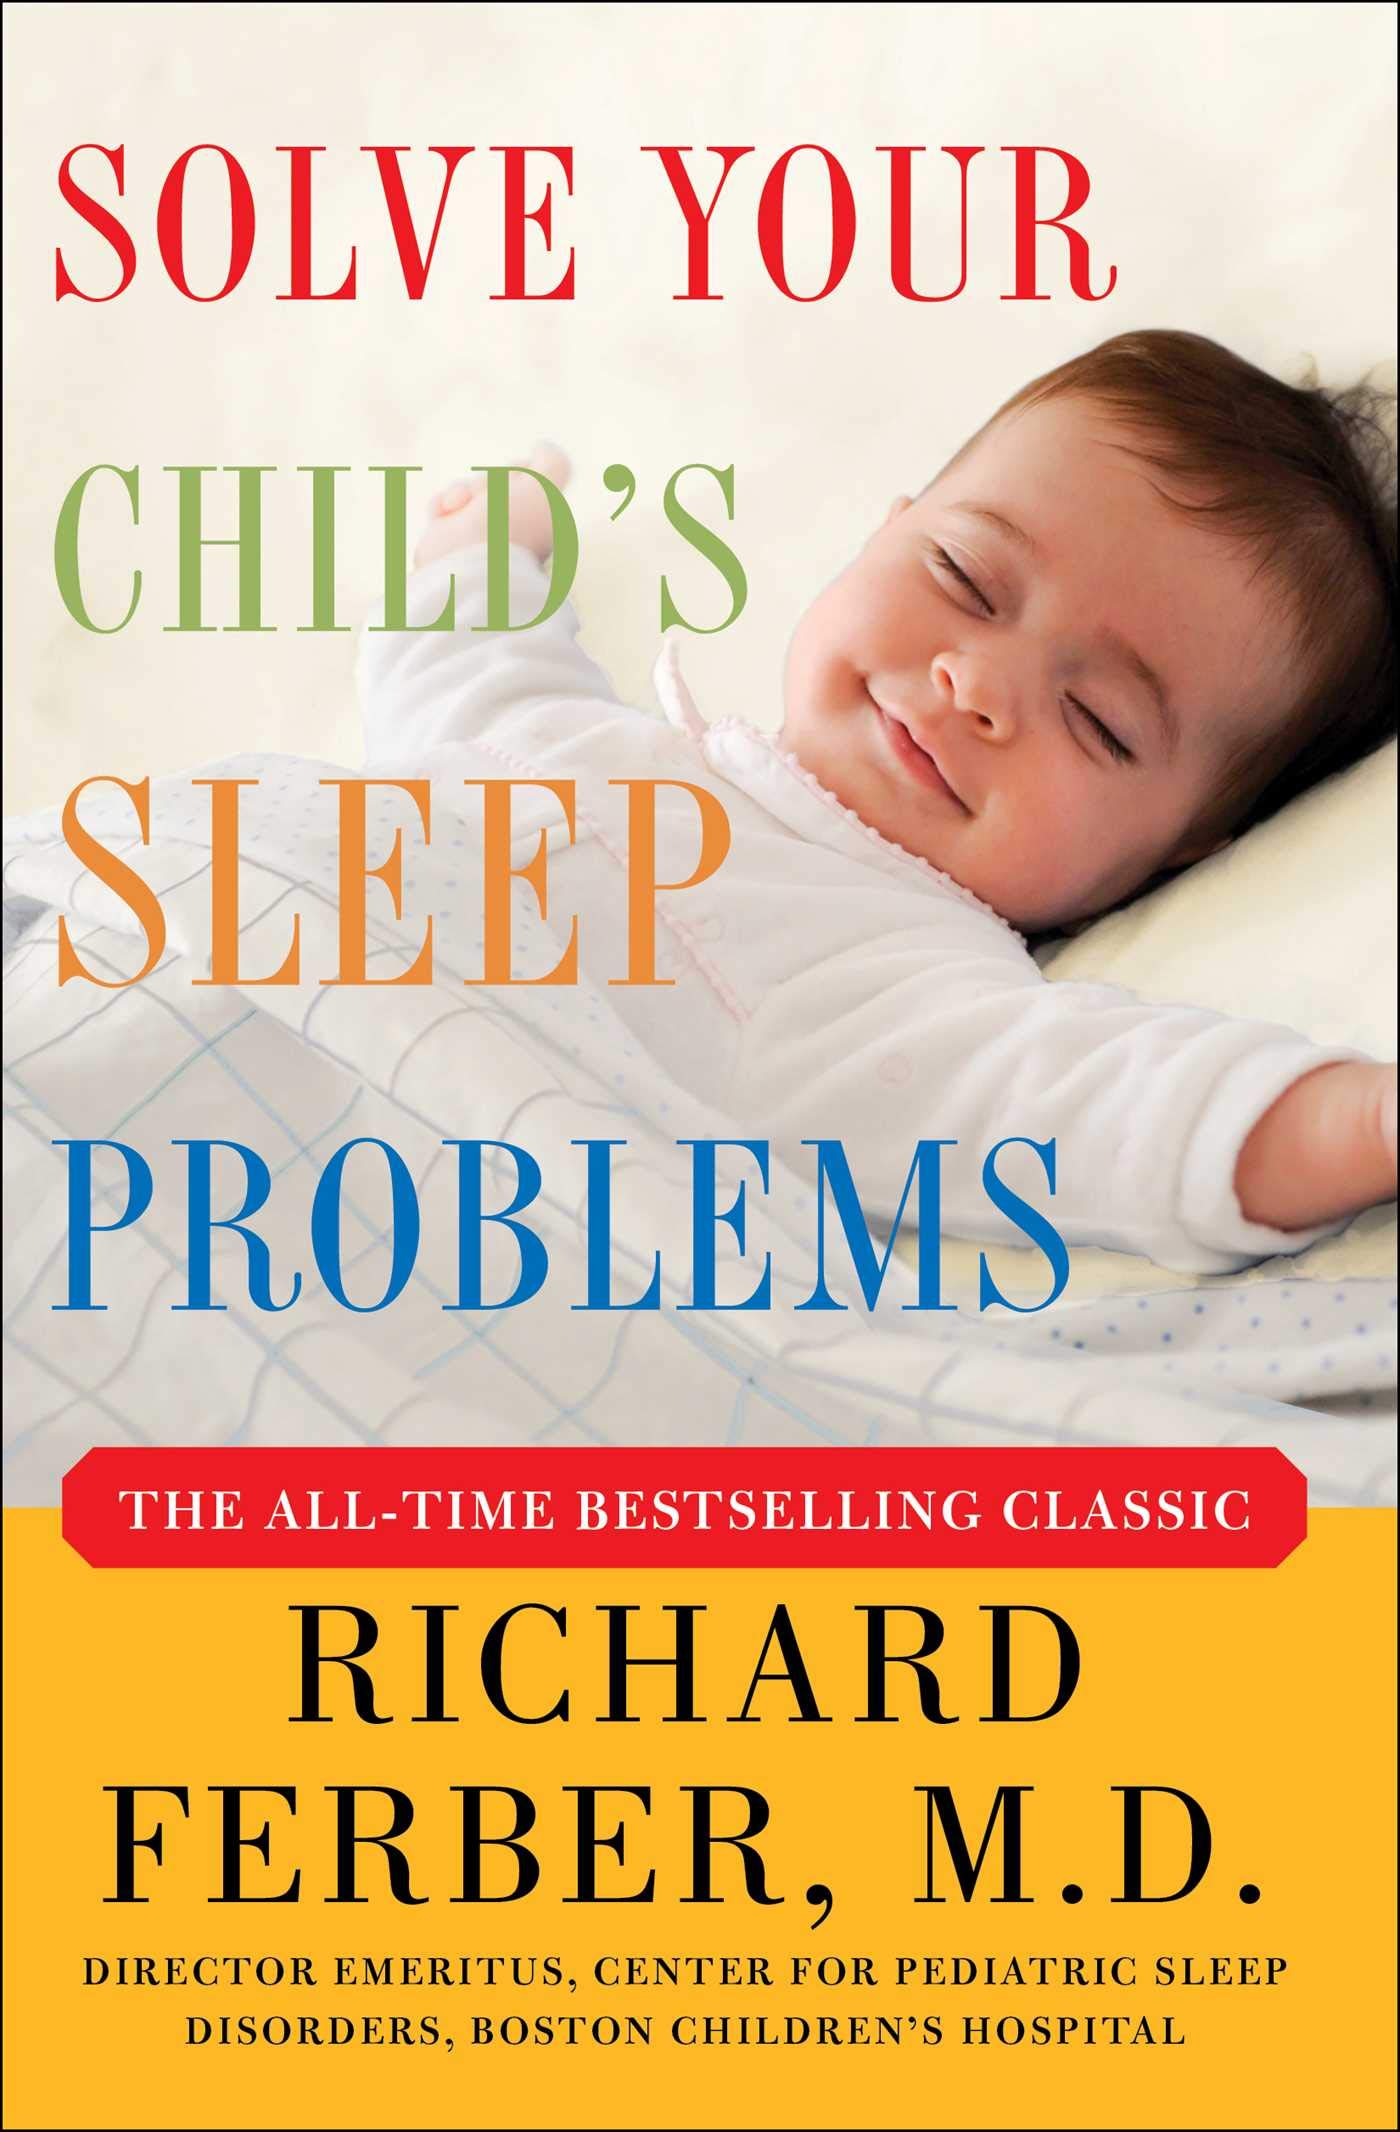 Top 17 Best Sleep Training Books for Babies Reviews in 2023 6